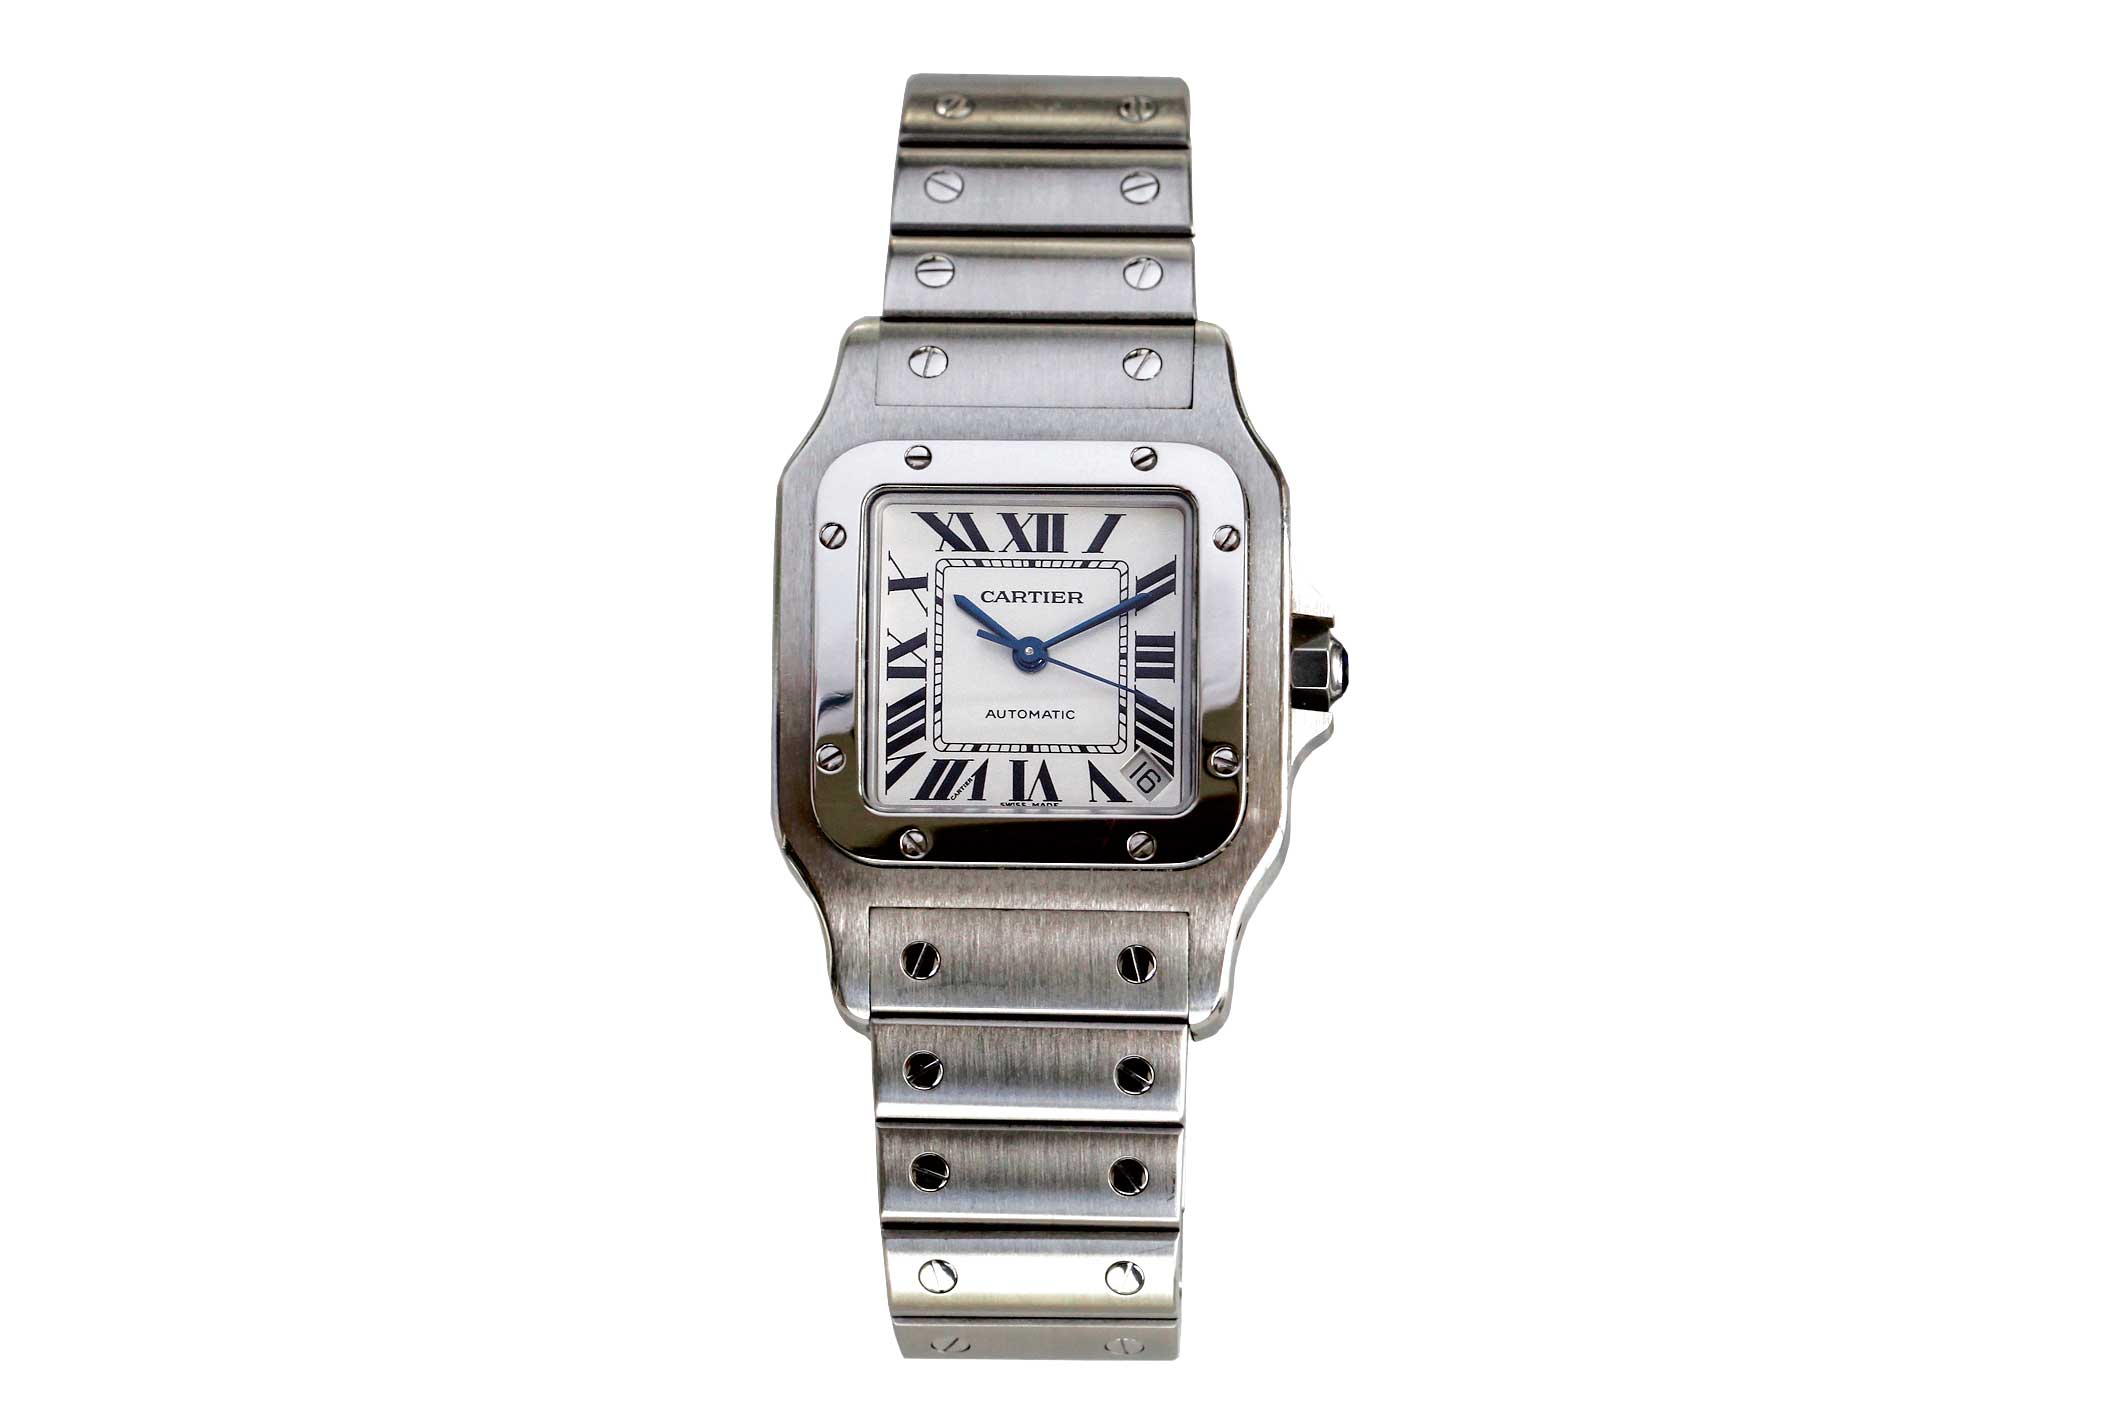 The Cartier Santos Galbée, which was launched in 1987